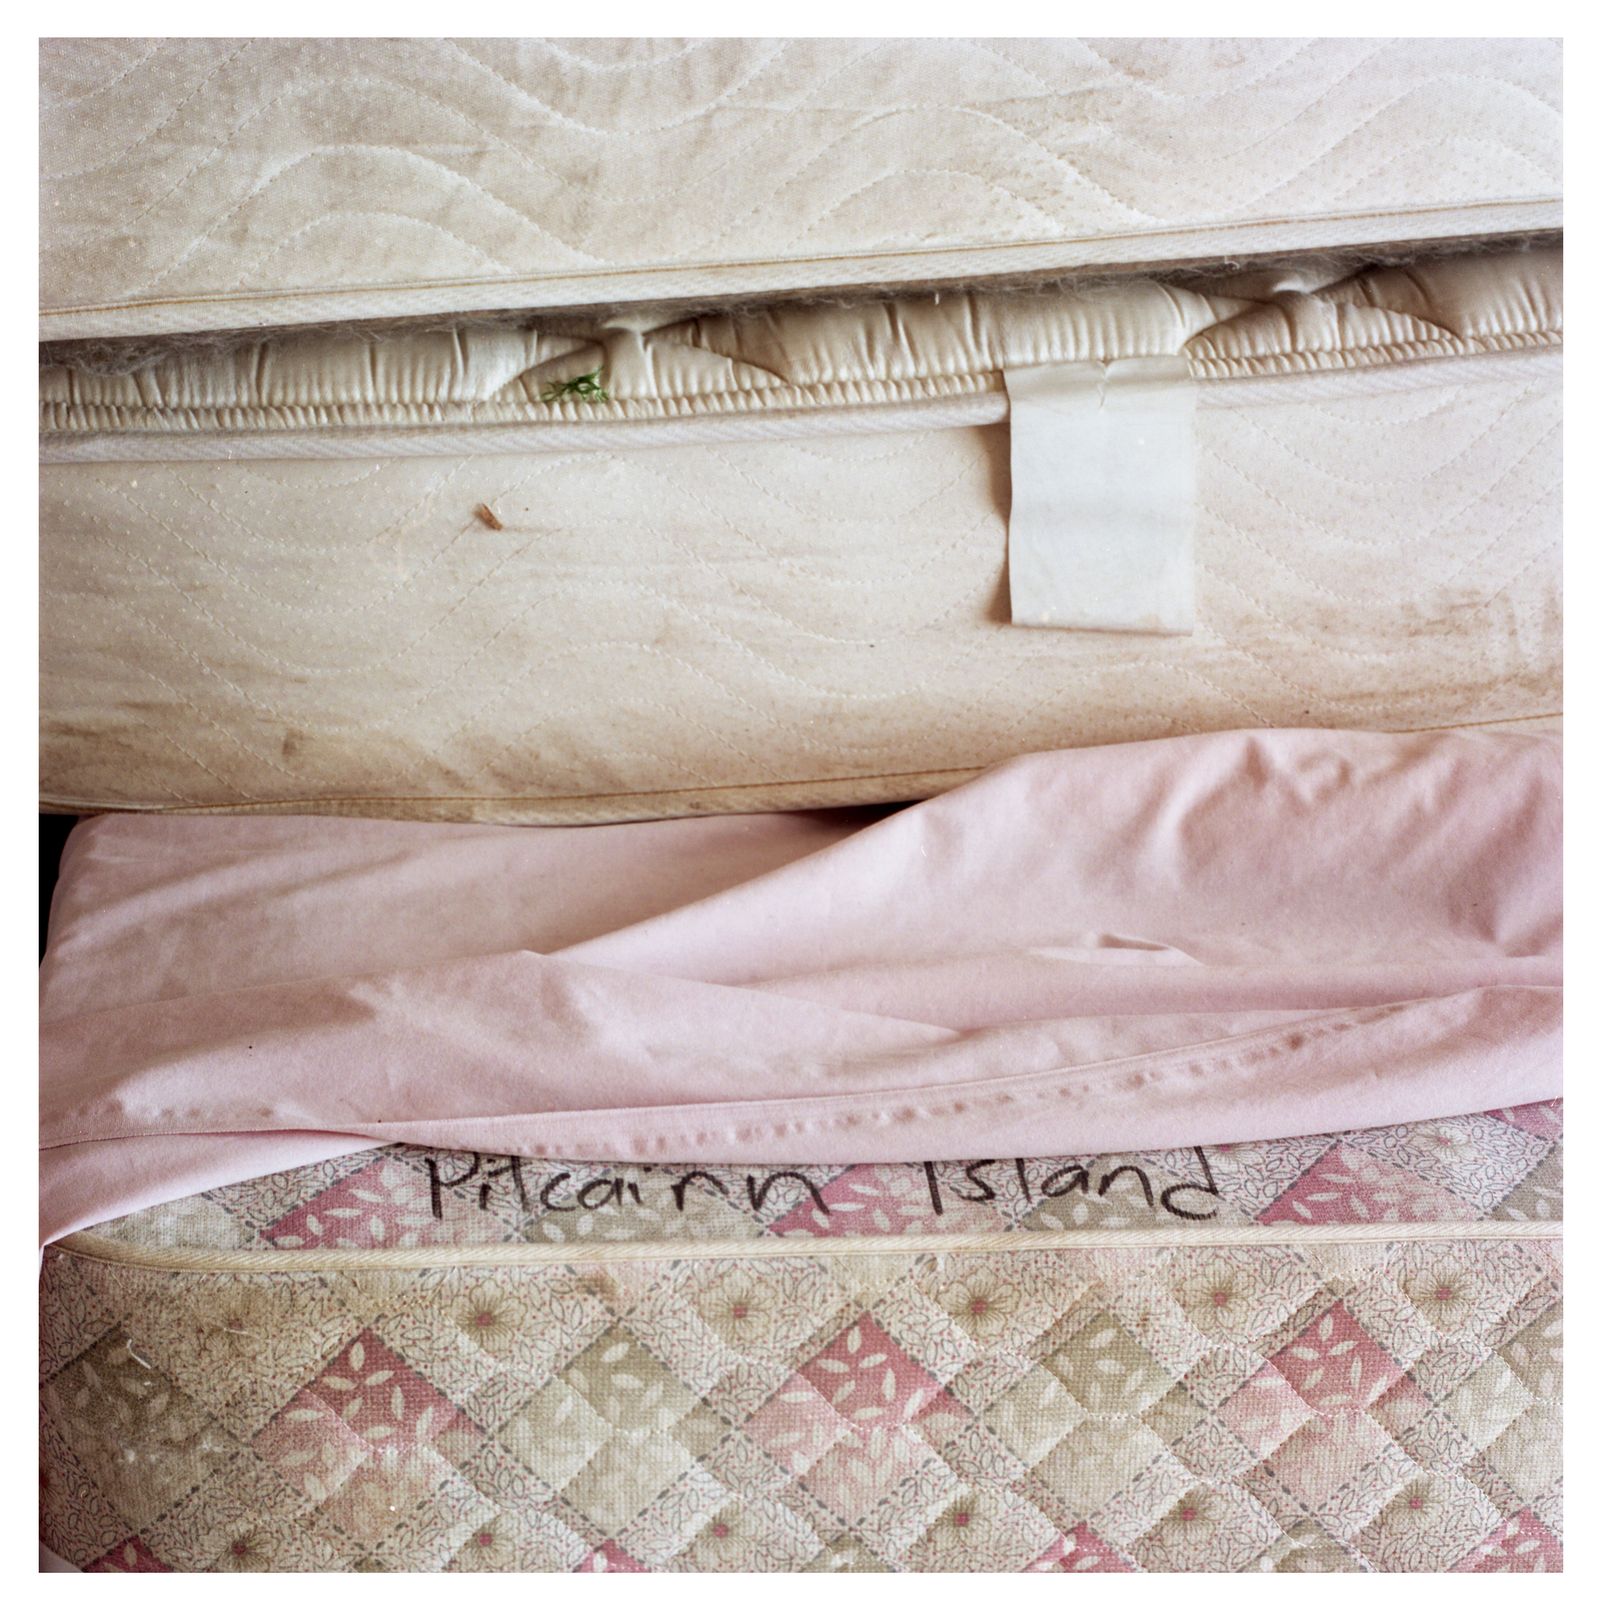 © Rhiannon Adam - Mattresses on Pitcairn, stacked in the childhood bedroom of a girl that has long since left.